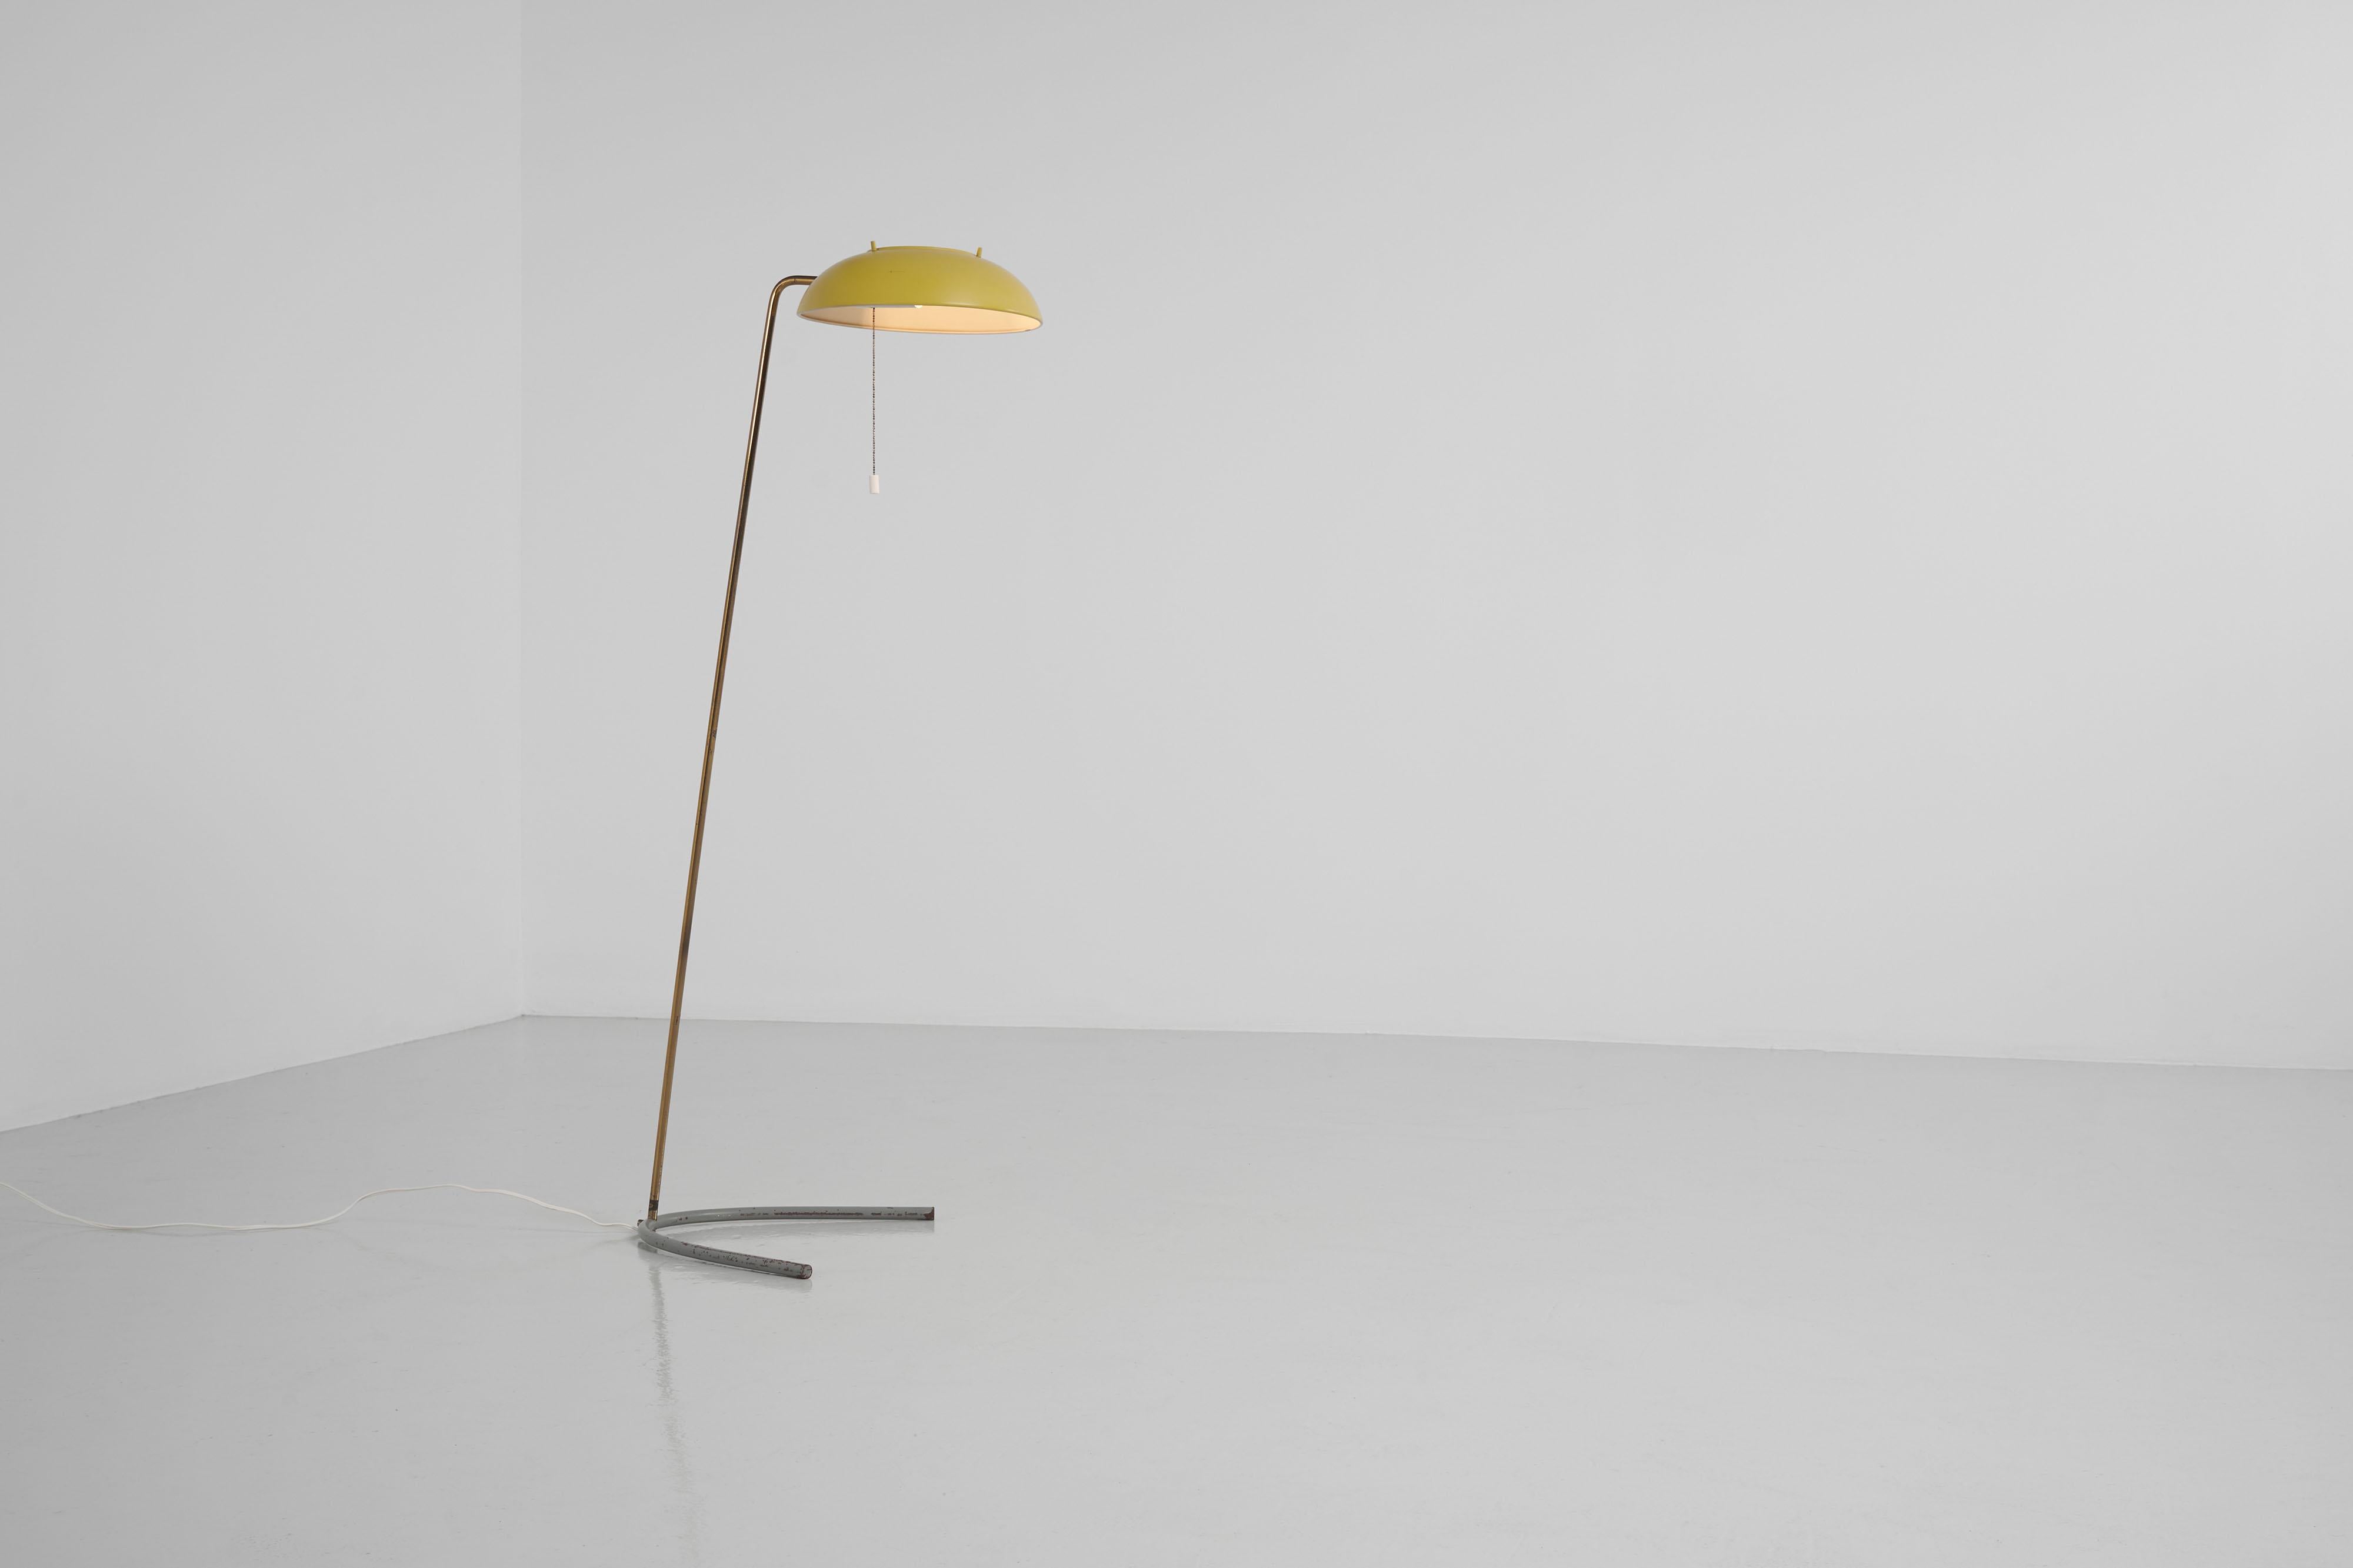 Highly rare floor lamp designed by Gino Sarfatti and manufactured by Arteluce, Italy 1953. This beautiful floor lamp is an early design by Sarfatti and it is the only one I saw on the market in the past 15 years of collecting. The lamp has a solid